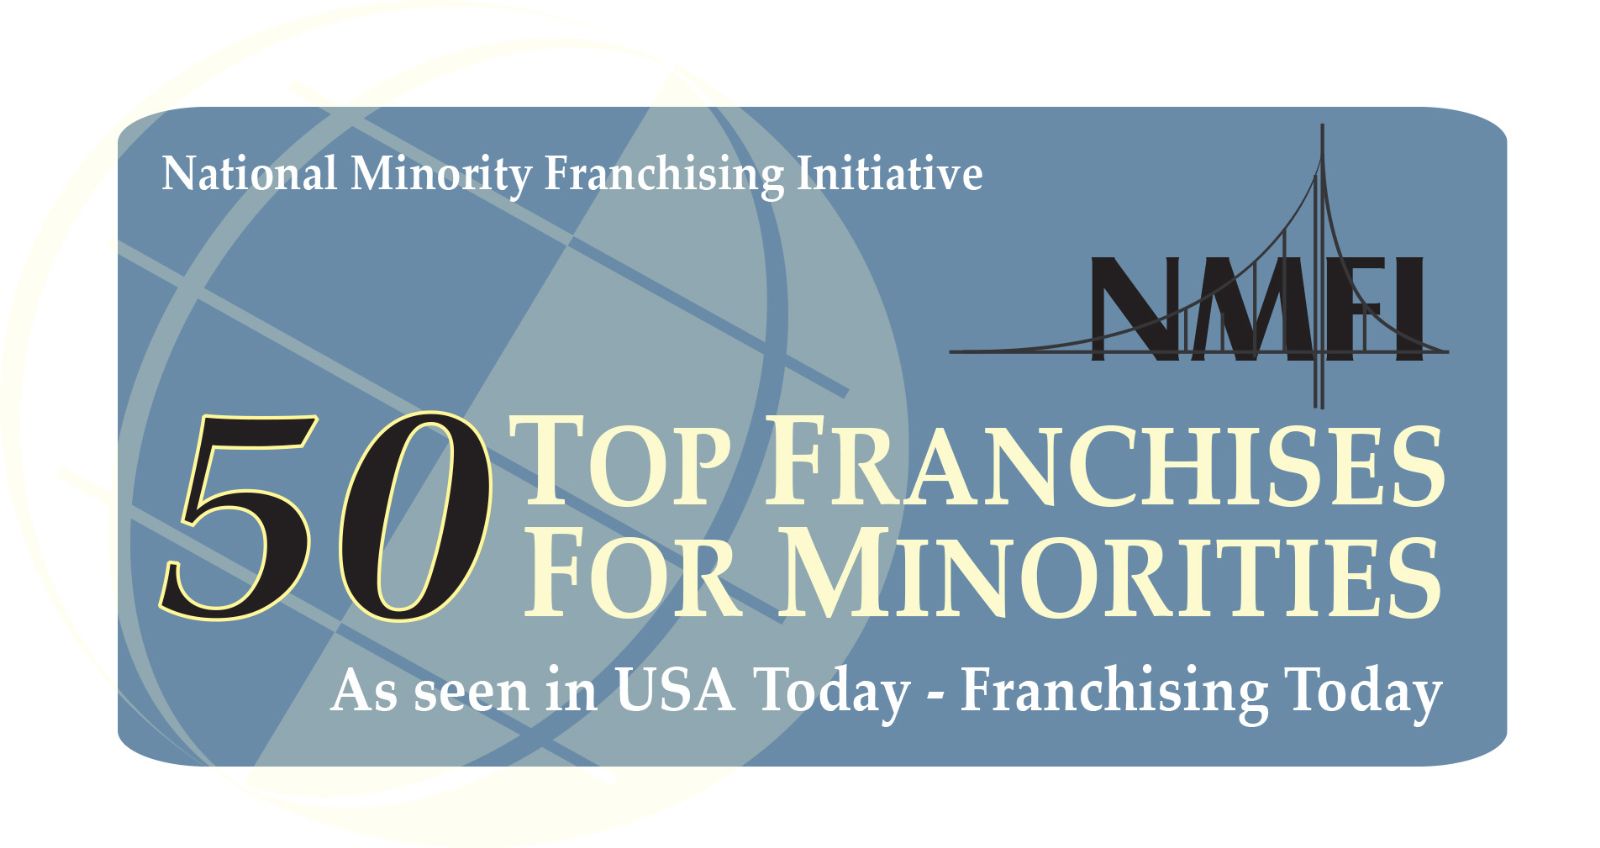 i9 Sports Named Top 50 Franchise for Minorities